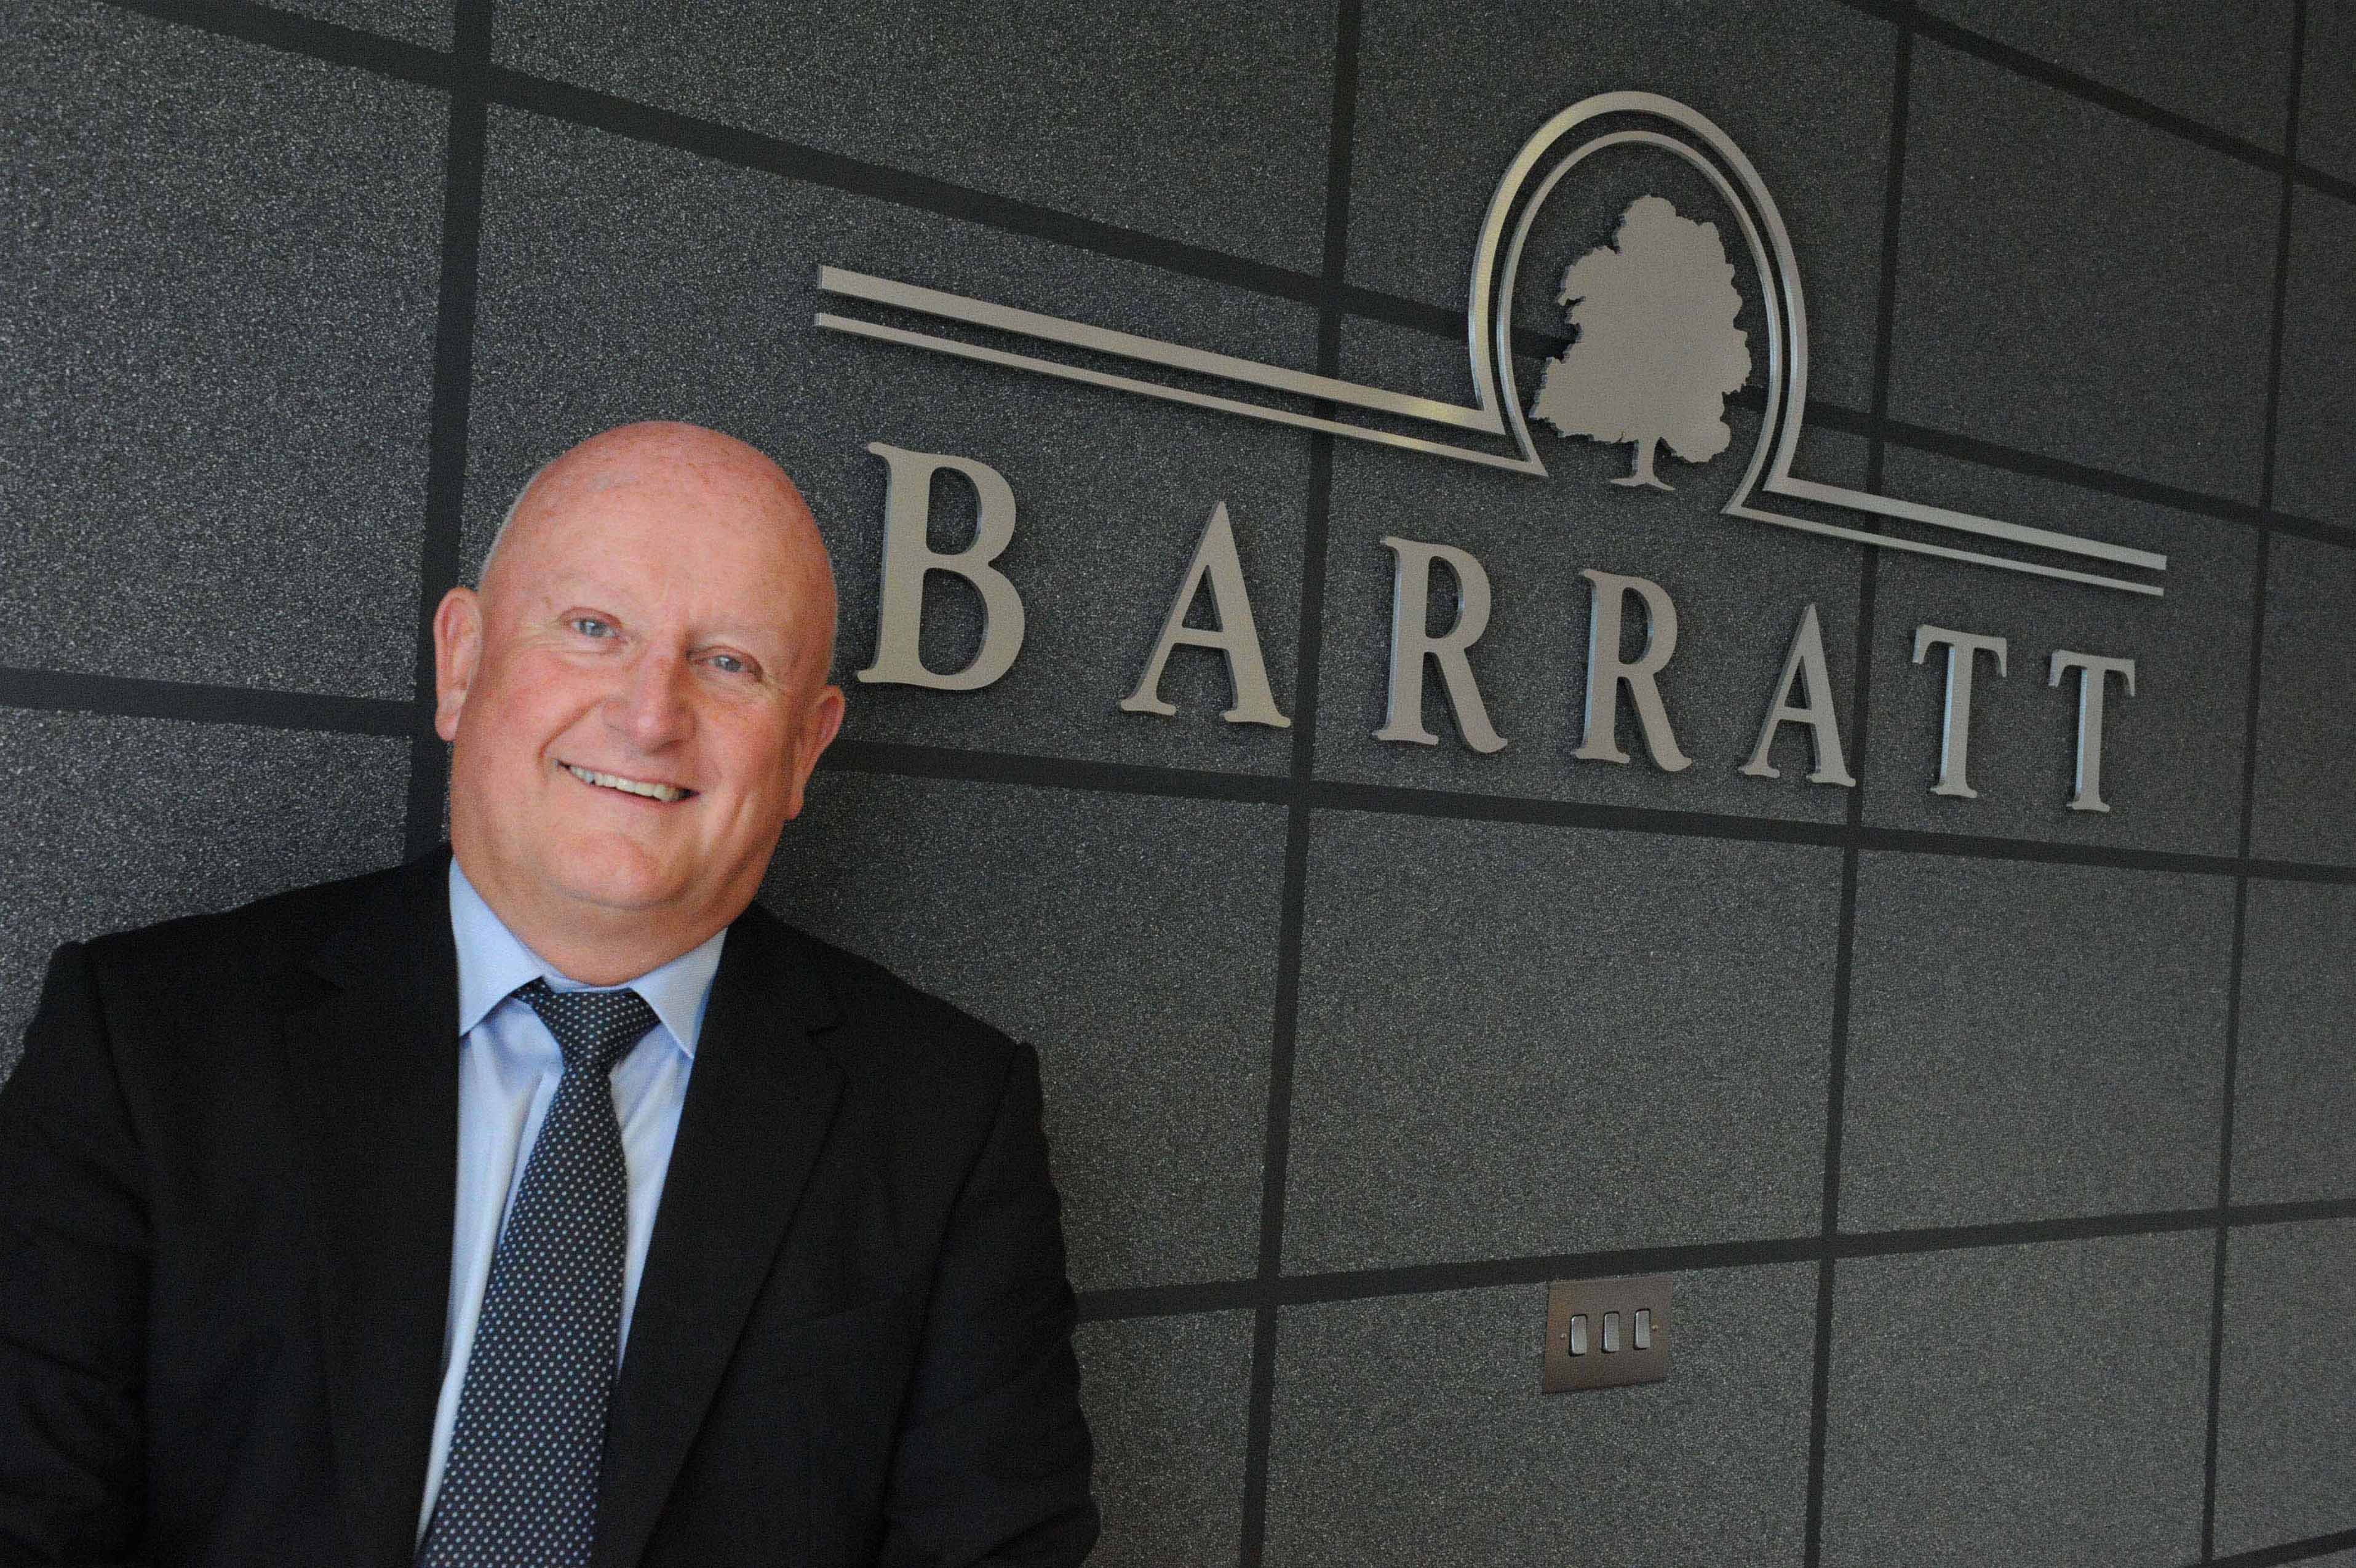 Barratt & David Wilson Homes Scotland to contribute up to £15,000 towards new homeowners’ mortgages